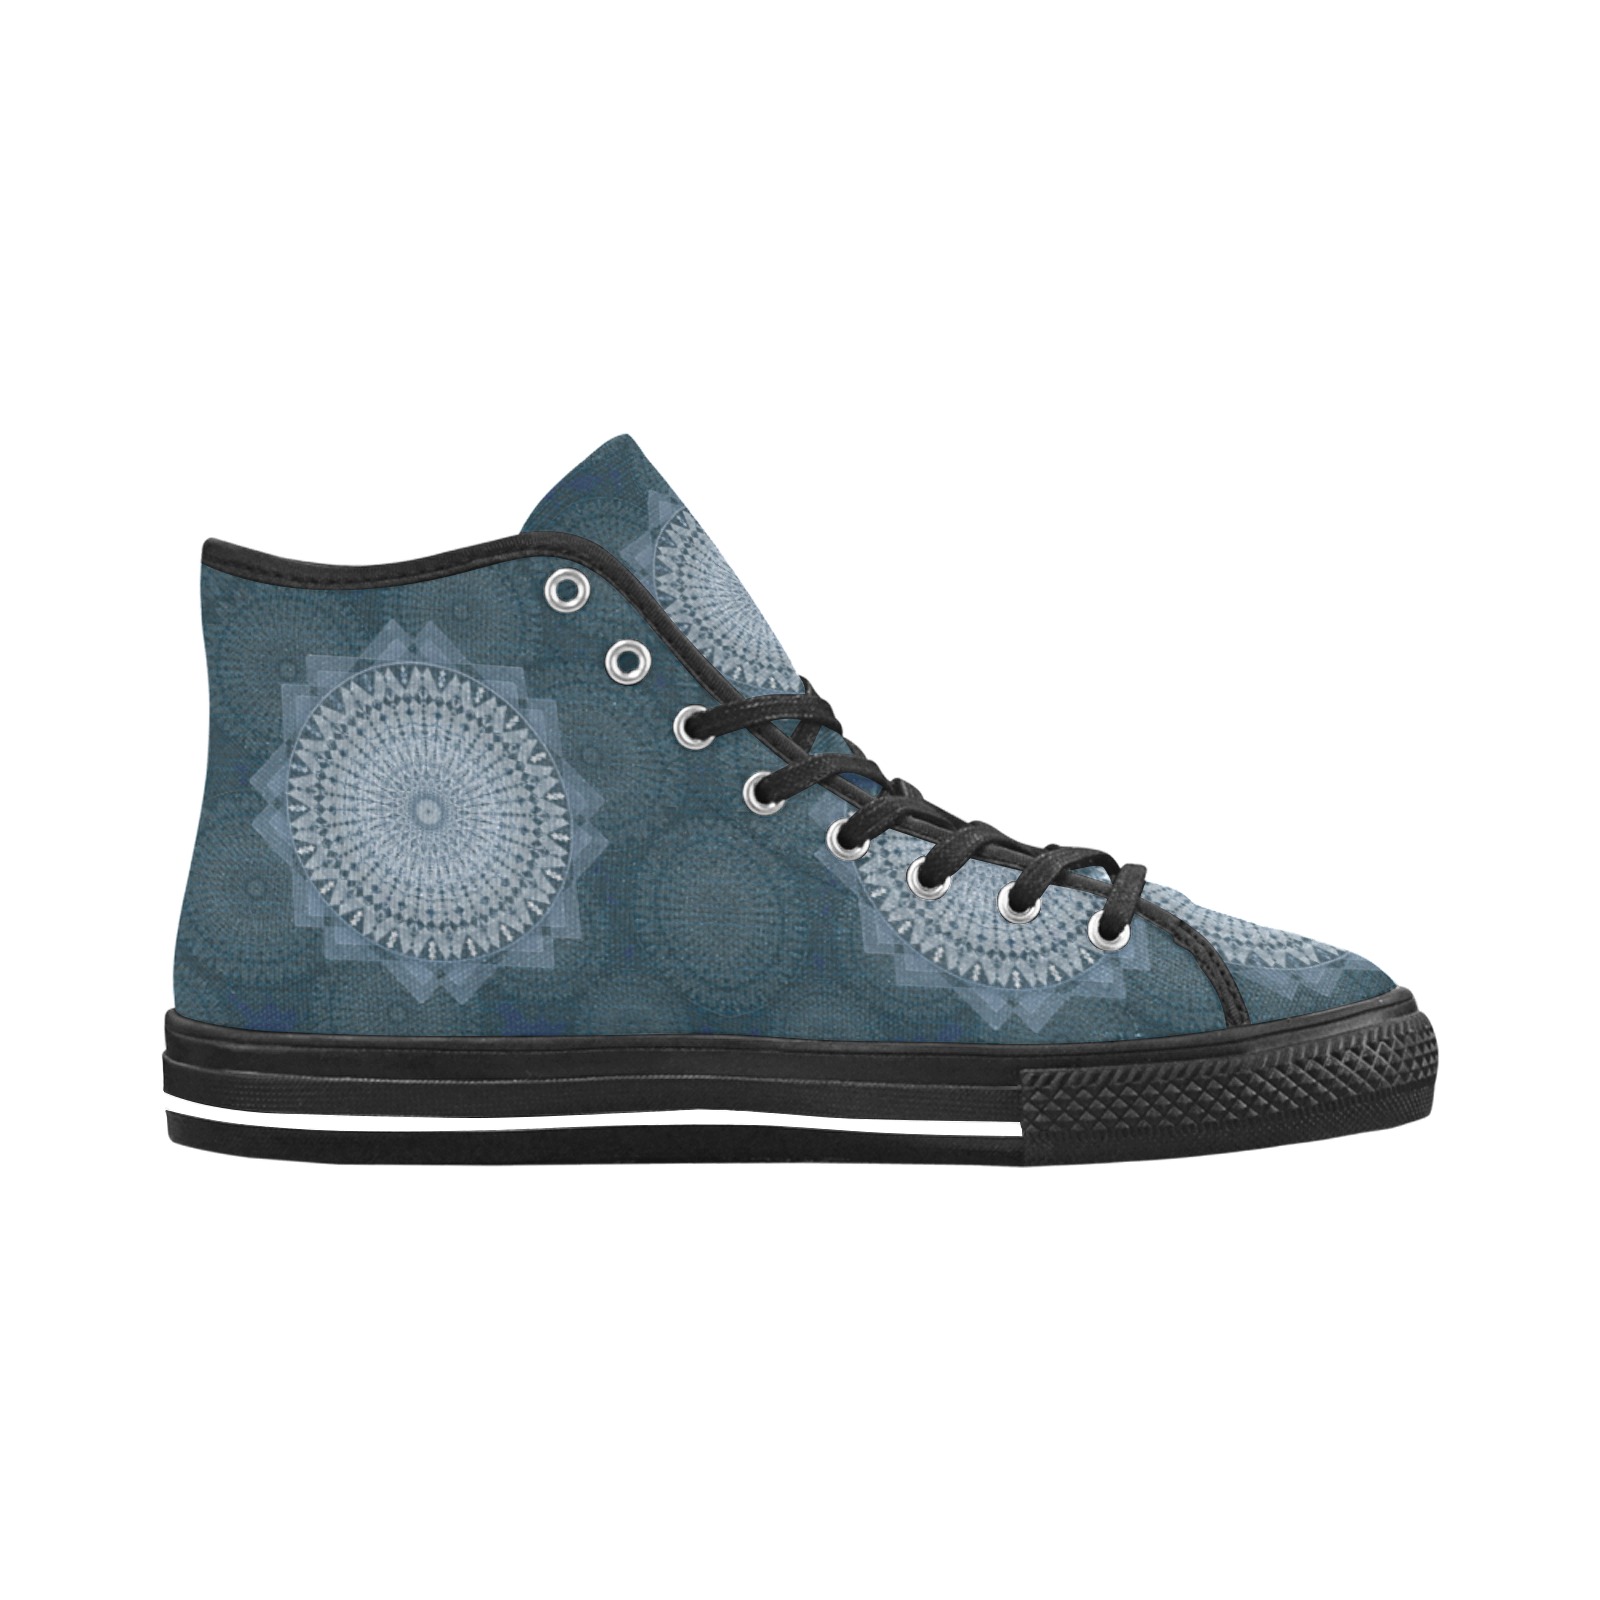 An initiation of the mass circle bue version Vancouver H Men's Canvas Shoes (1013-1)